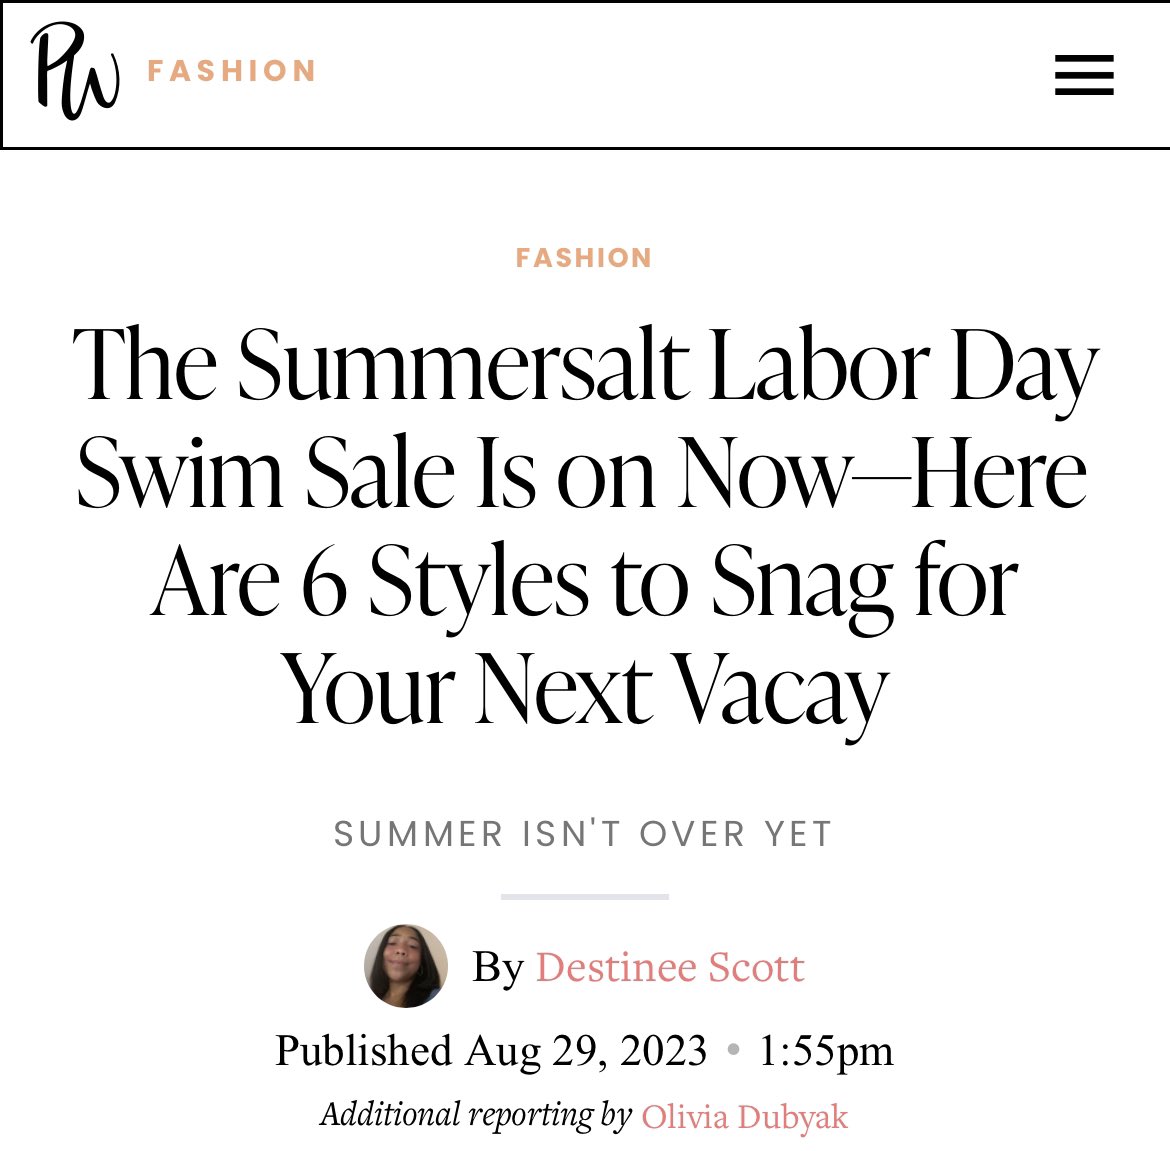 Thank you @PureWow & Destinee Scott for featuring our Labor Day Swim Sale in your recent article ☀️ Read more: purewow.com/fashion/summer…